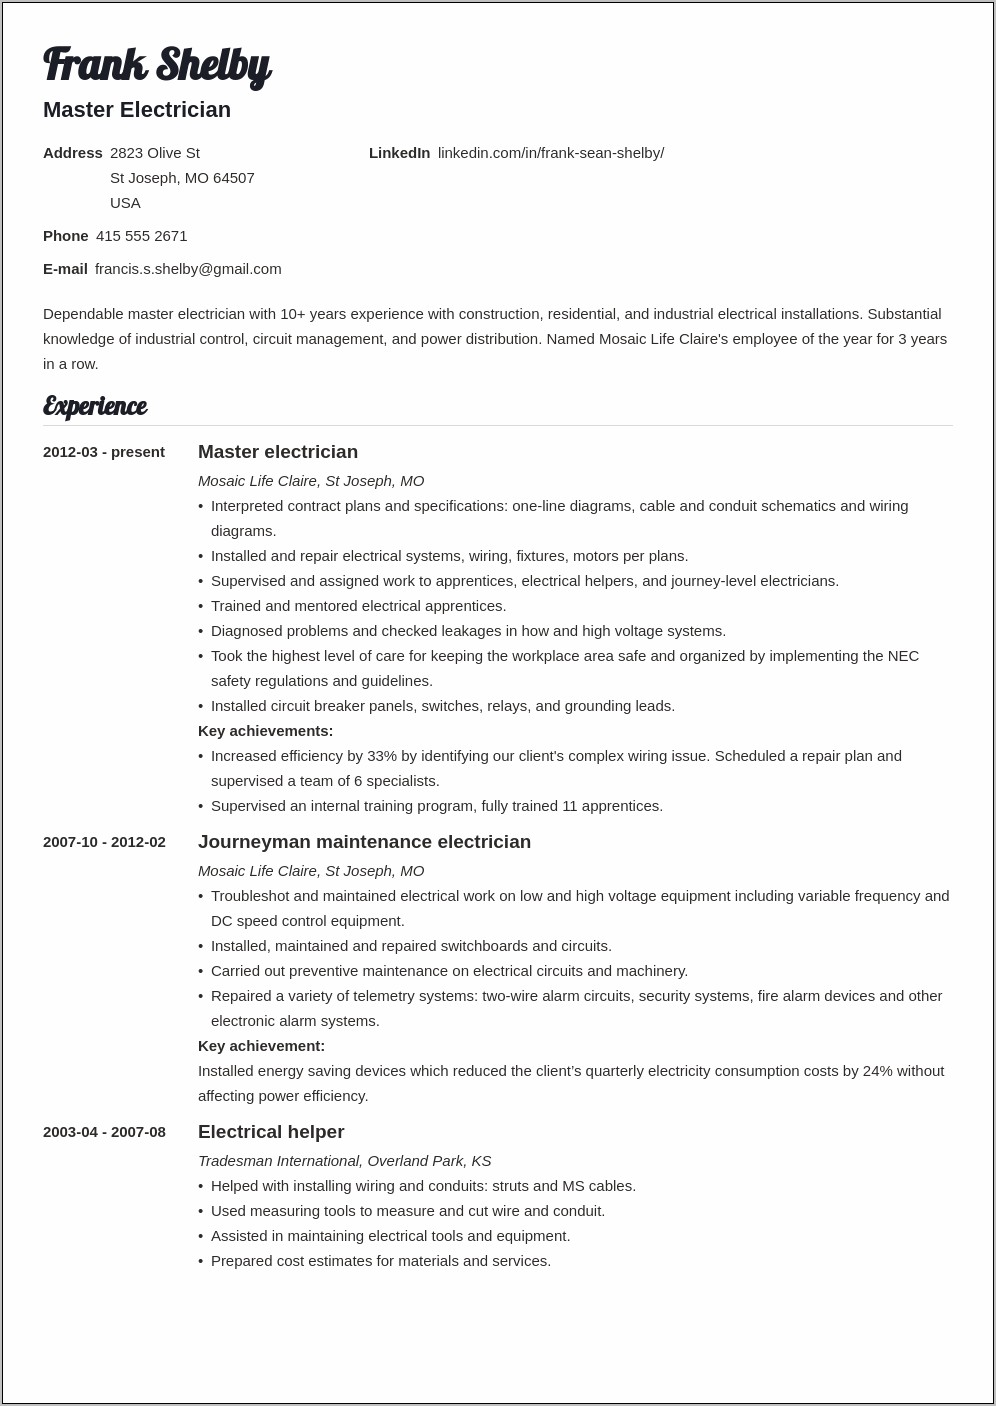 Is Handled A Good Word For Resume